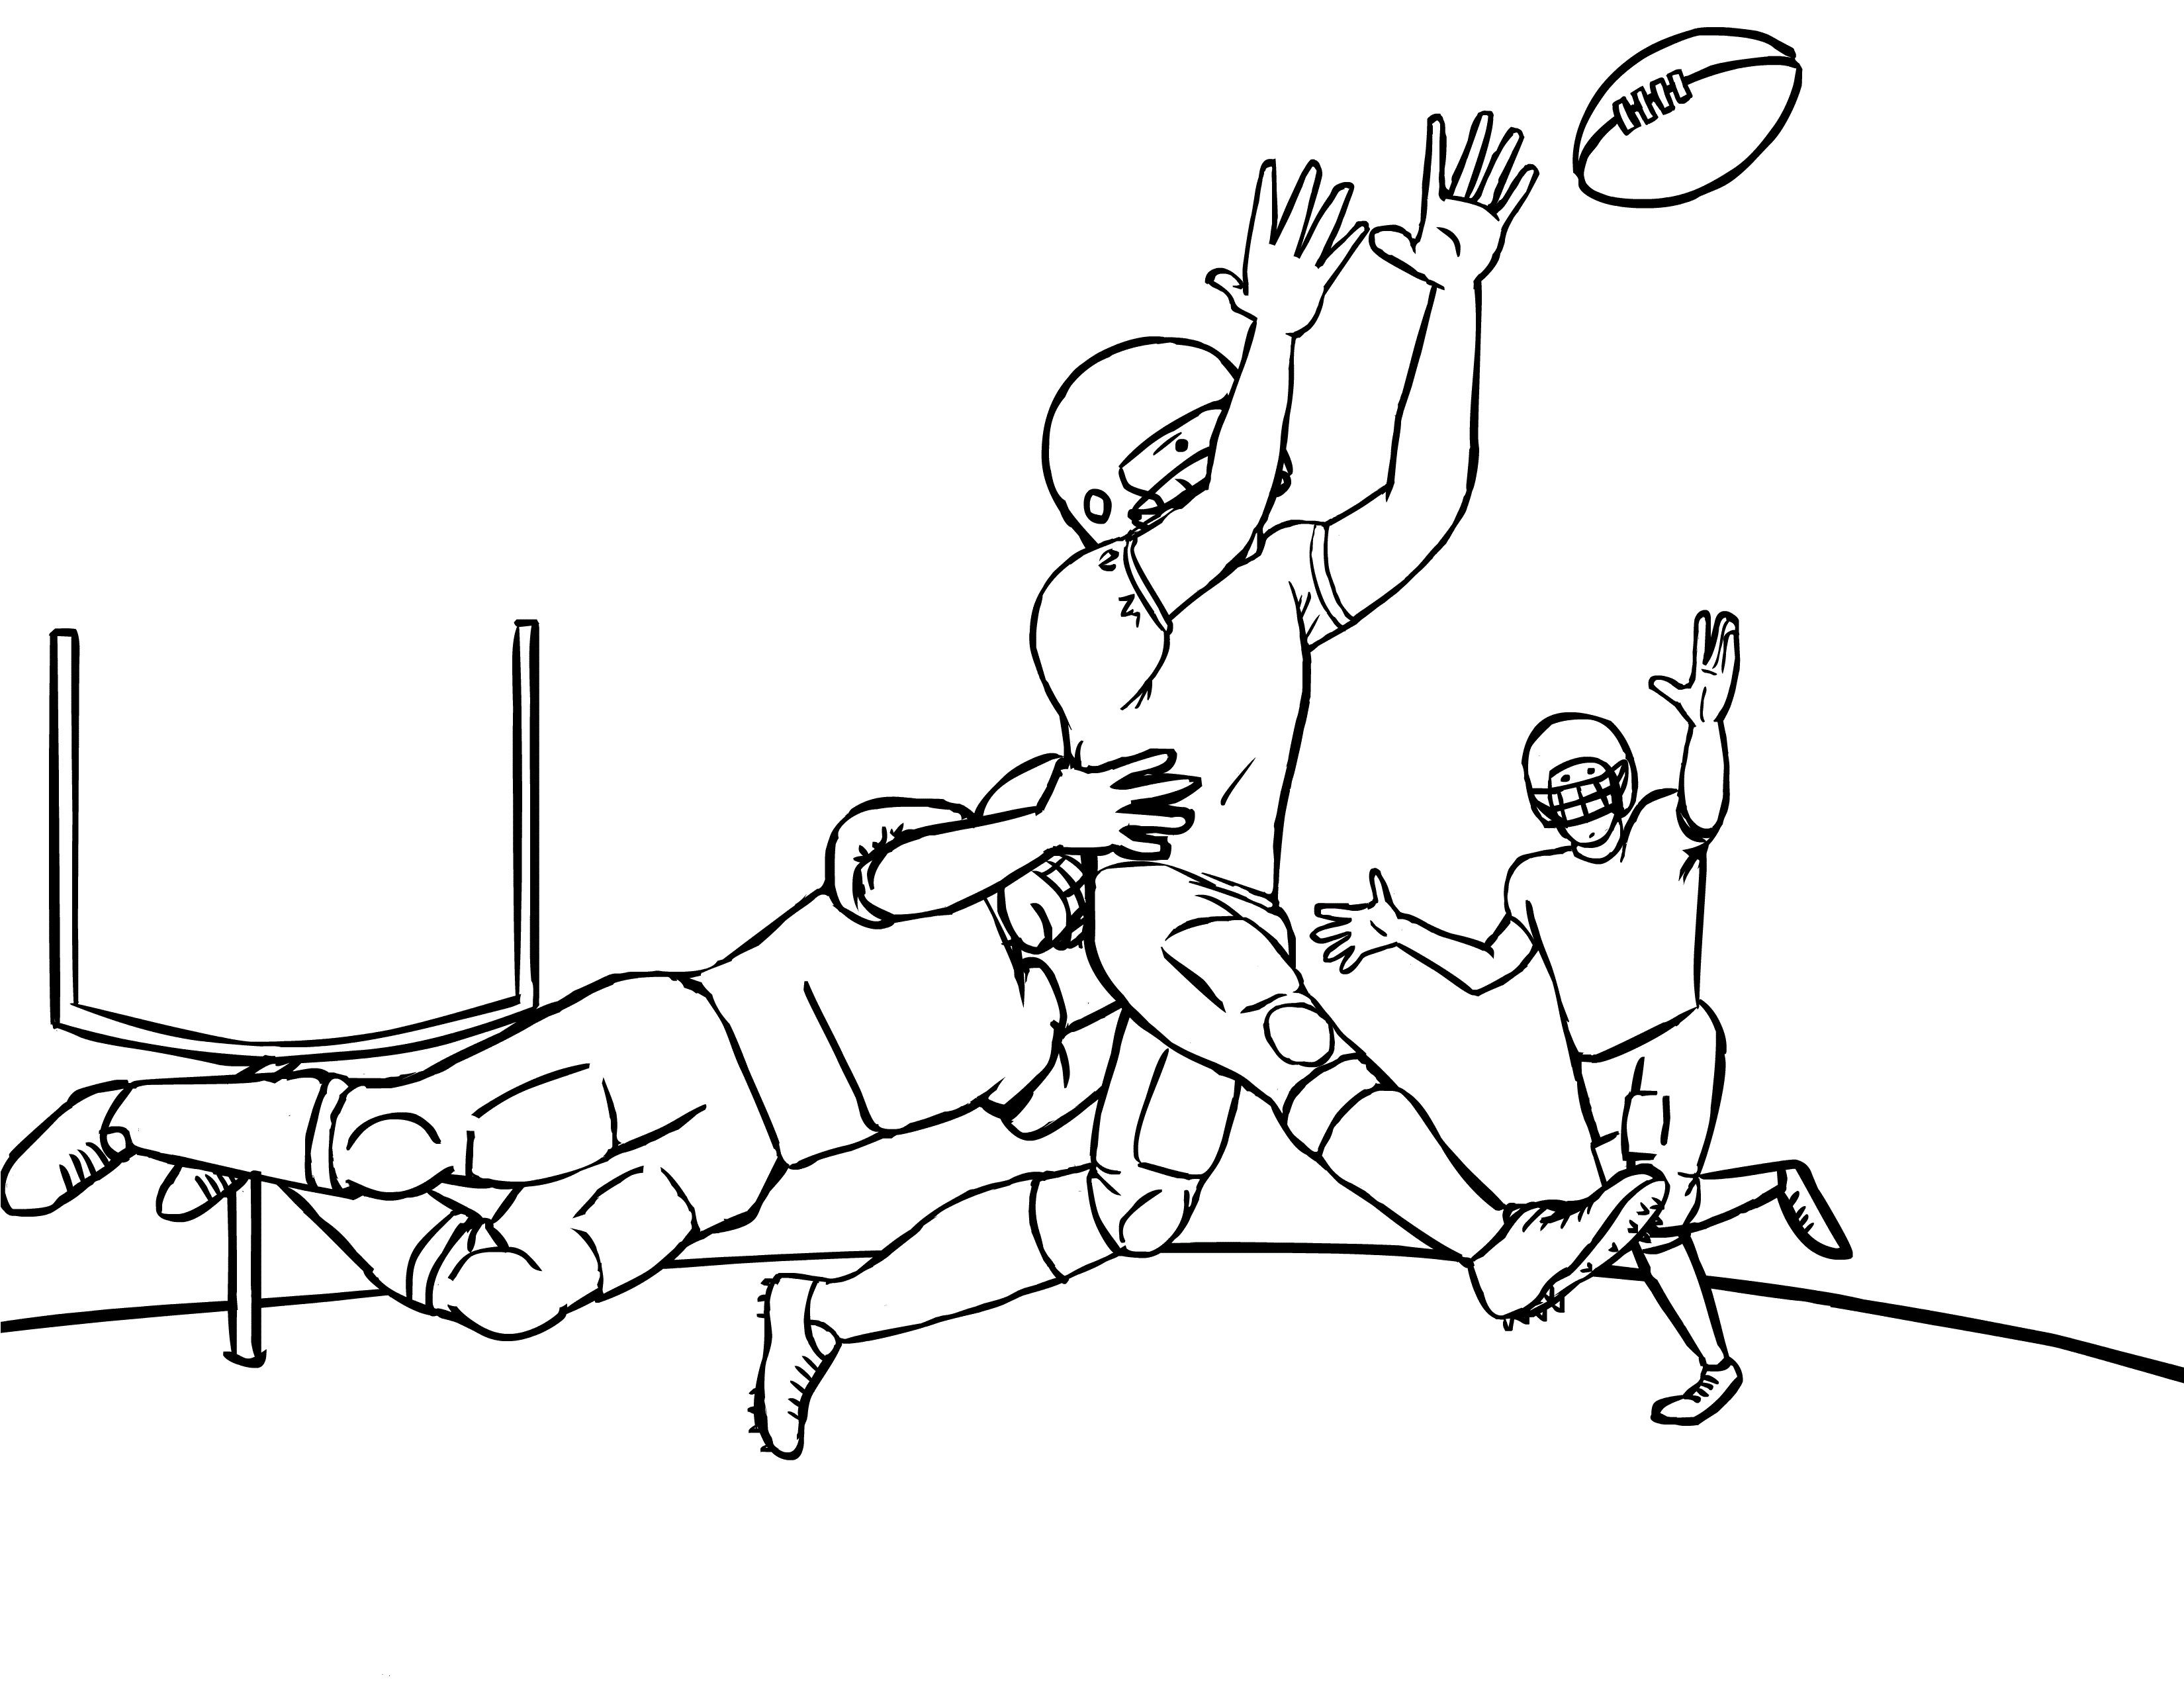 Free Printable Football Coloring Pages for Kids Best Coloring Pages